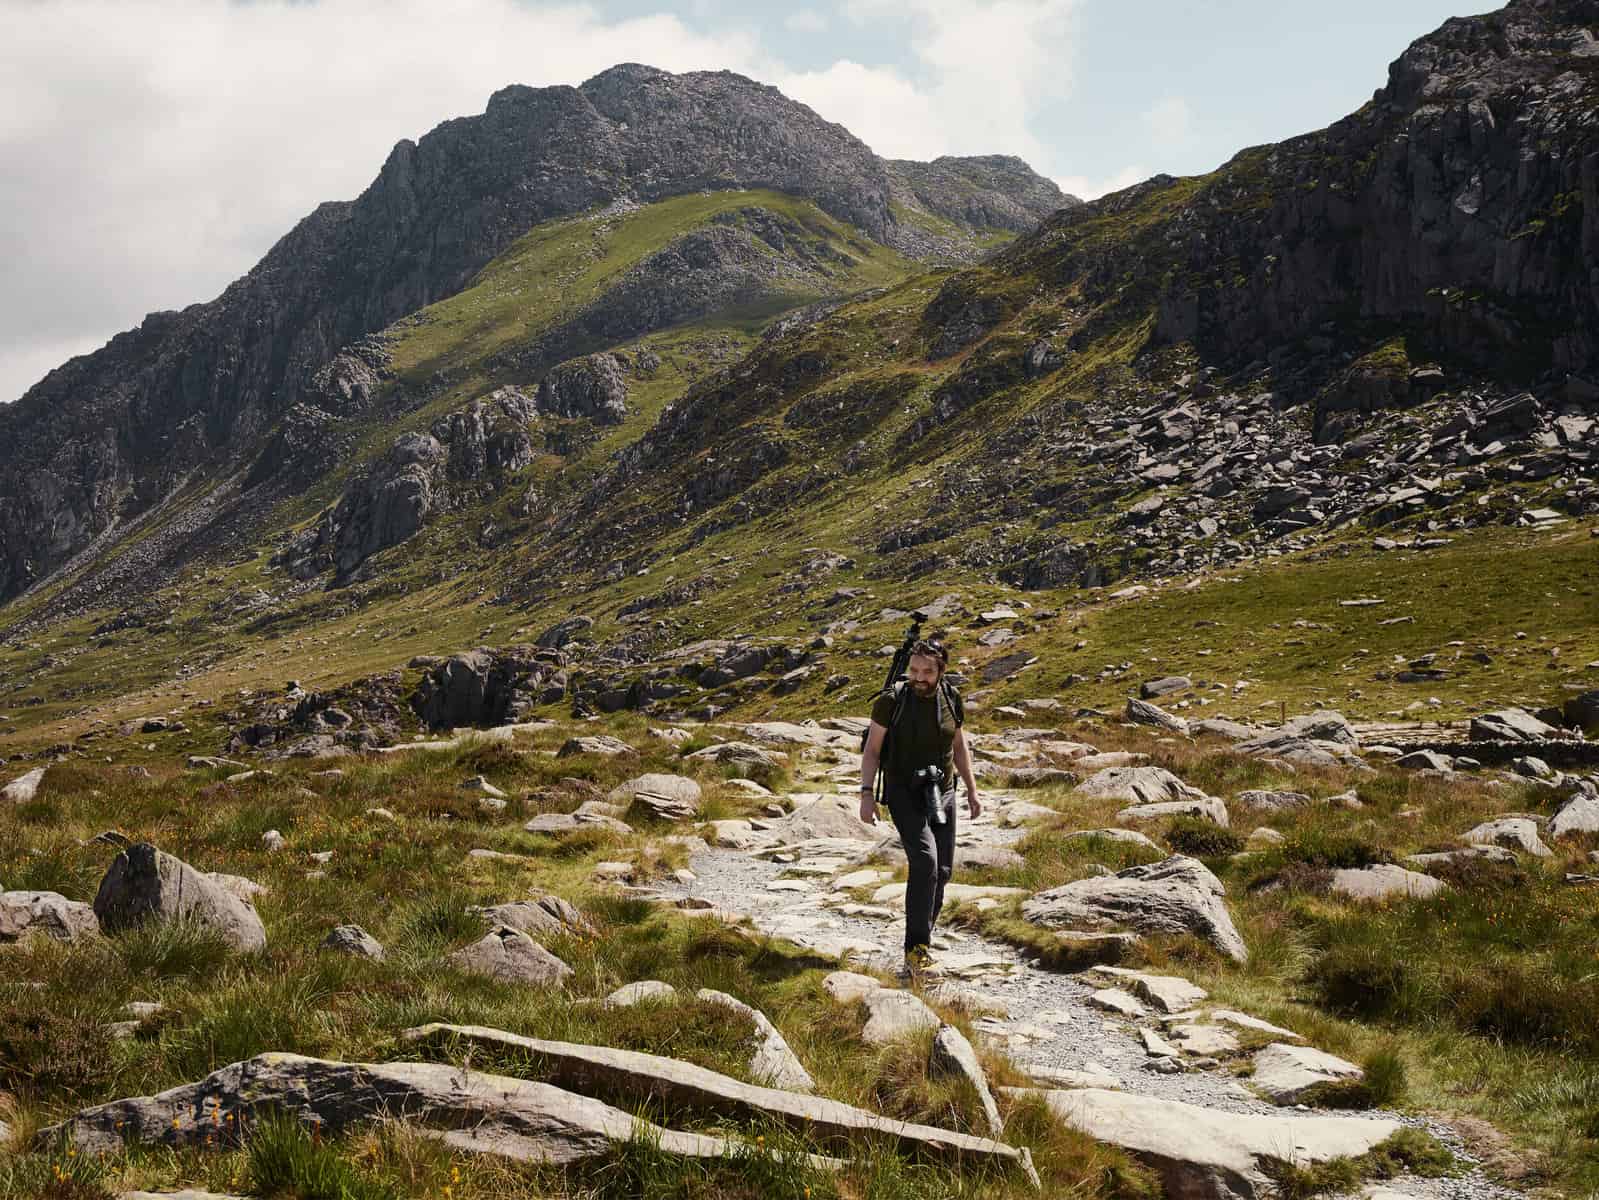 ID: A landscape image. Matt is walking to the front of the frame on a Rocky Mountain path with rocks and grasses all around him. He is wearing black trousers, yellow shoes, green top and is carrying a camera around his neck and a tripod is visible from his backpack. As the trail heads off behind him, we see rocky mountains above him that are slate grey. The sky is slightly overcast on the left side and is blue on the other.